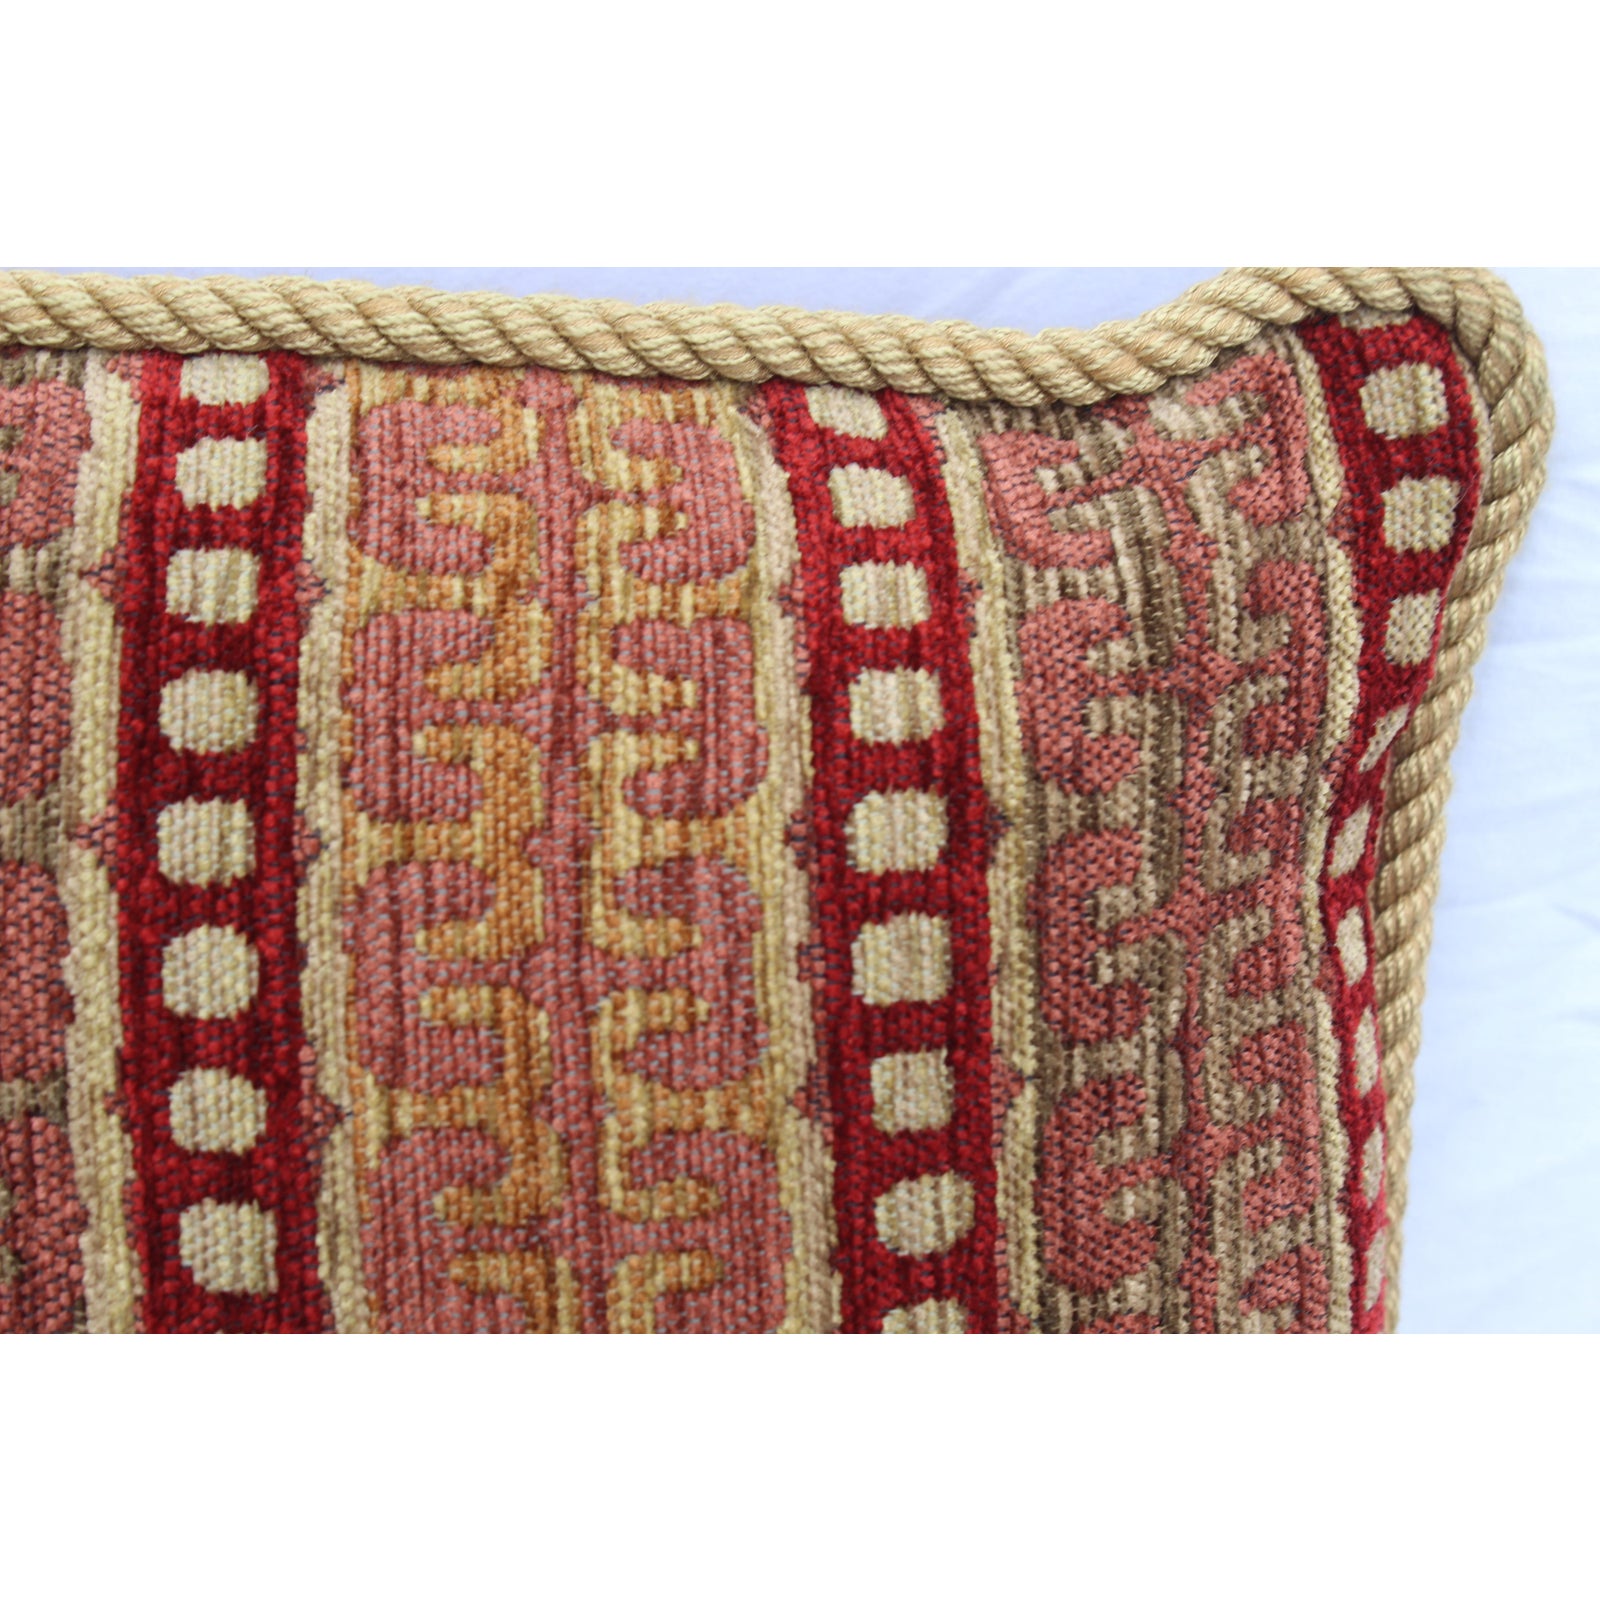 20th-century-contemporary-back-support-pillow-burgundy-and-gold-upholstered-decorative-pillow-4094